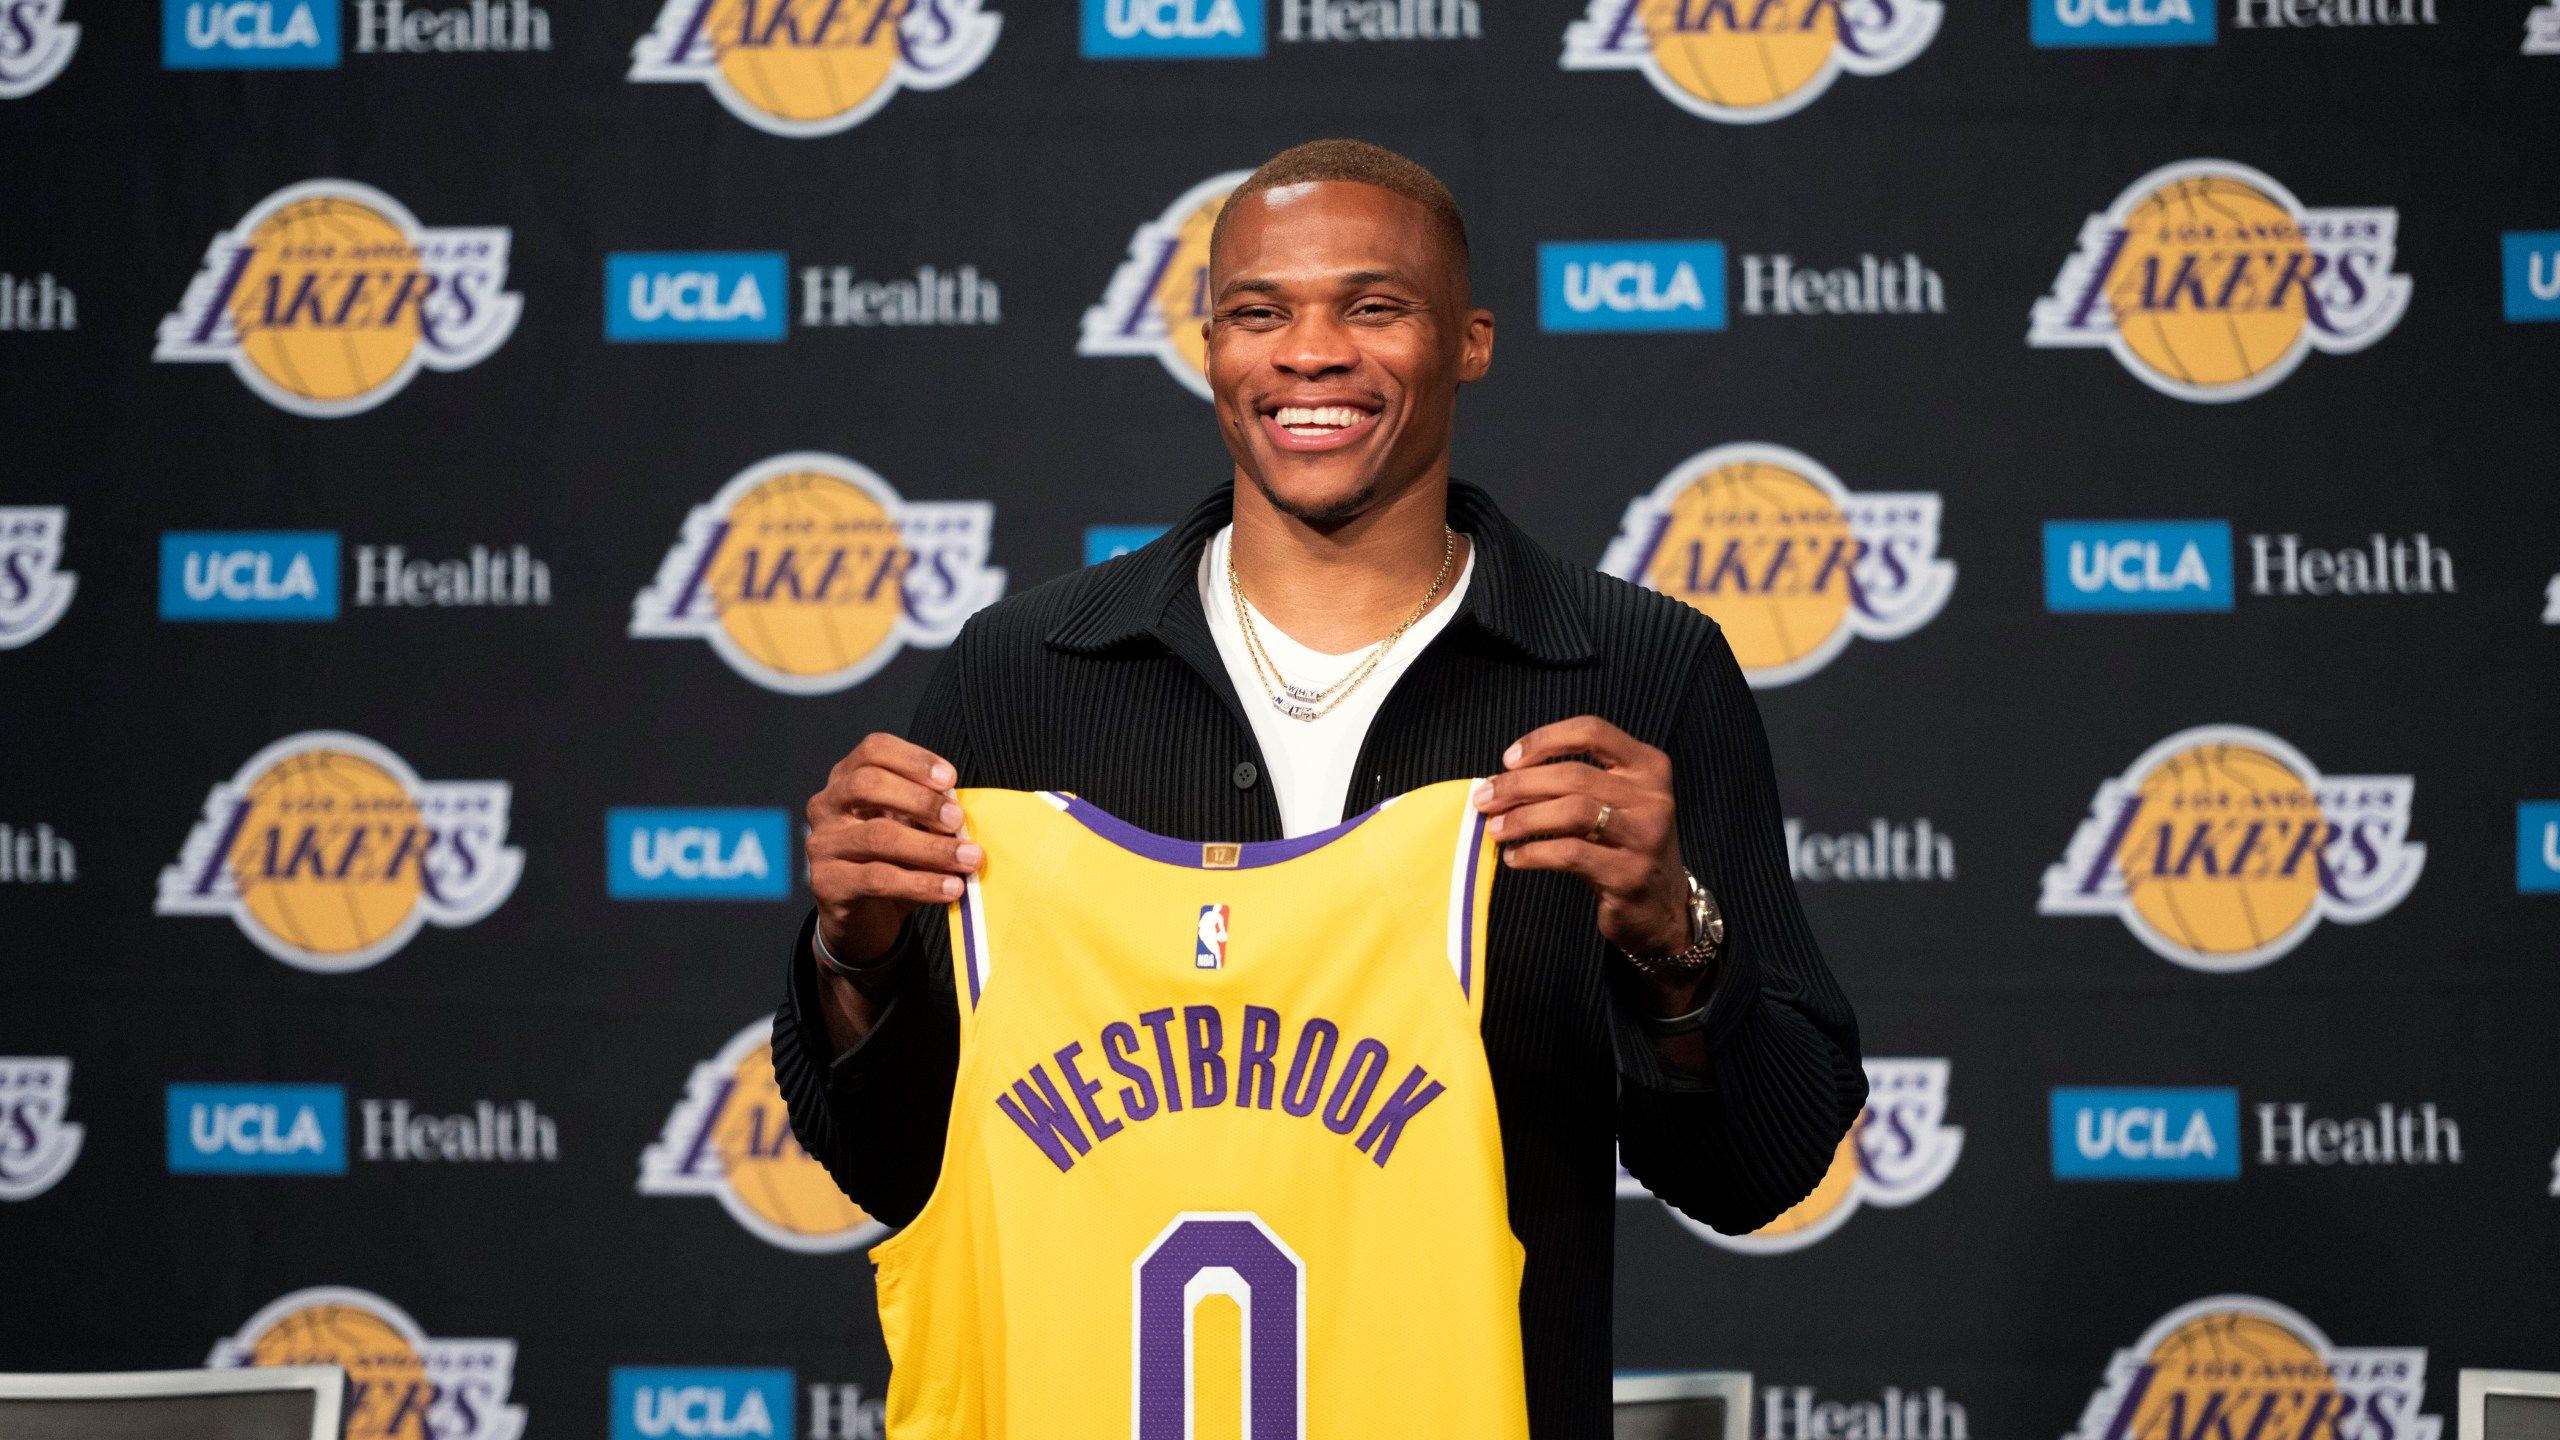 Russell Westbrook smiles as he holds up his Lakers jersey. - Los Angeles Lakers